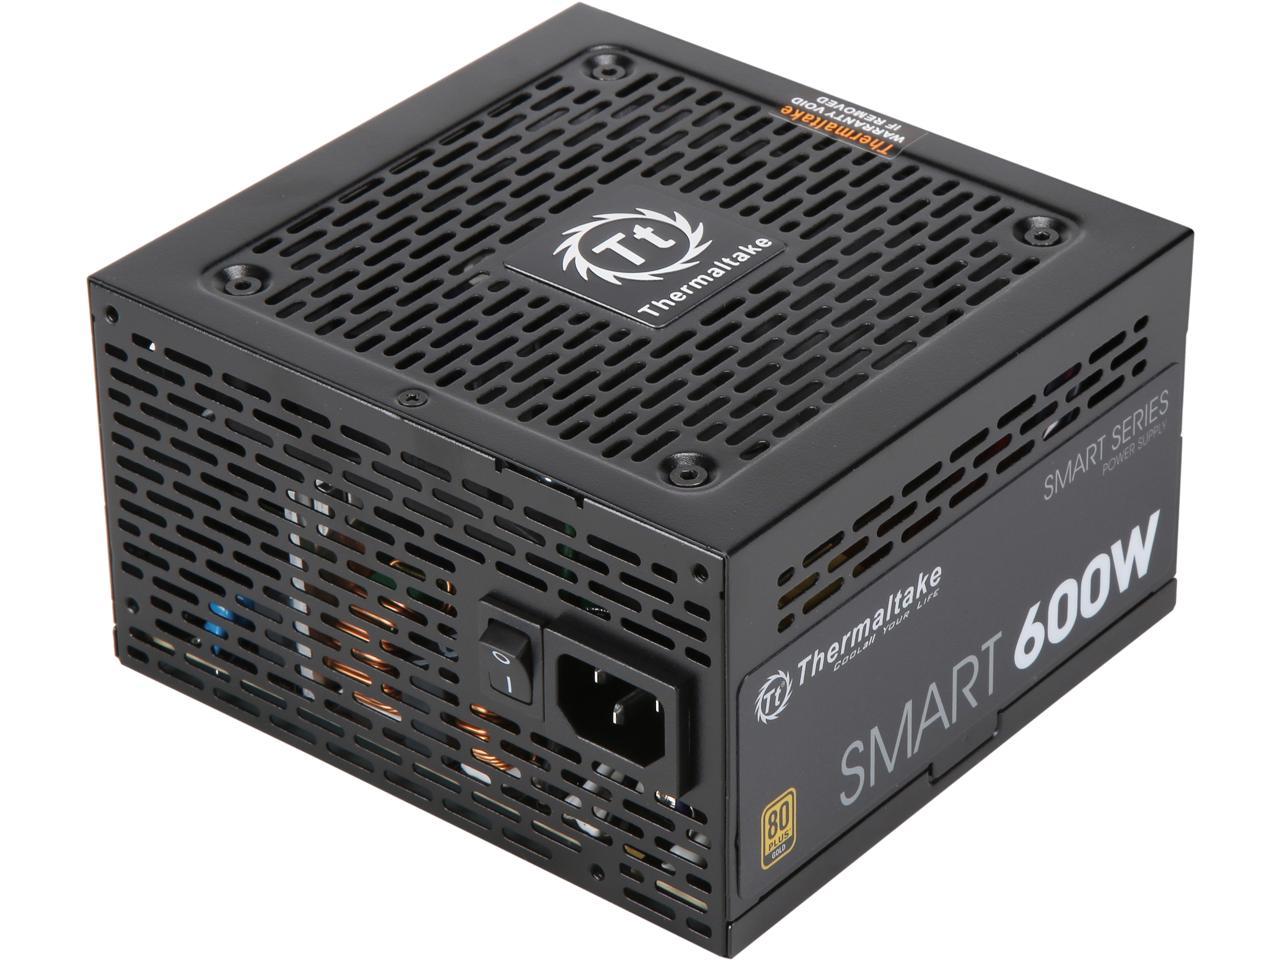 600W Thermaltake Power Supply, 80+ Gold Certified, Active PFC - POW-600TT